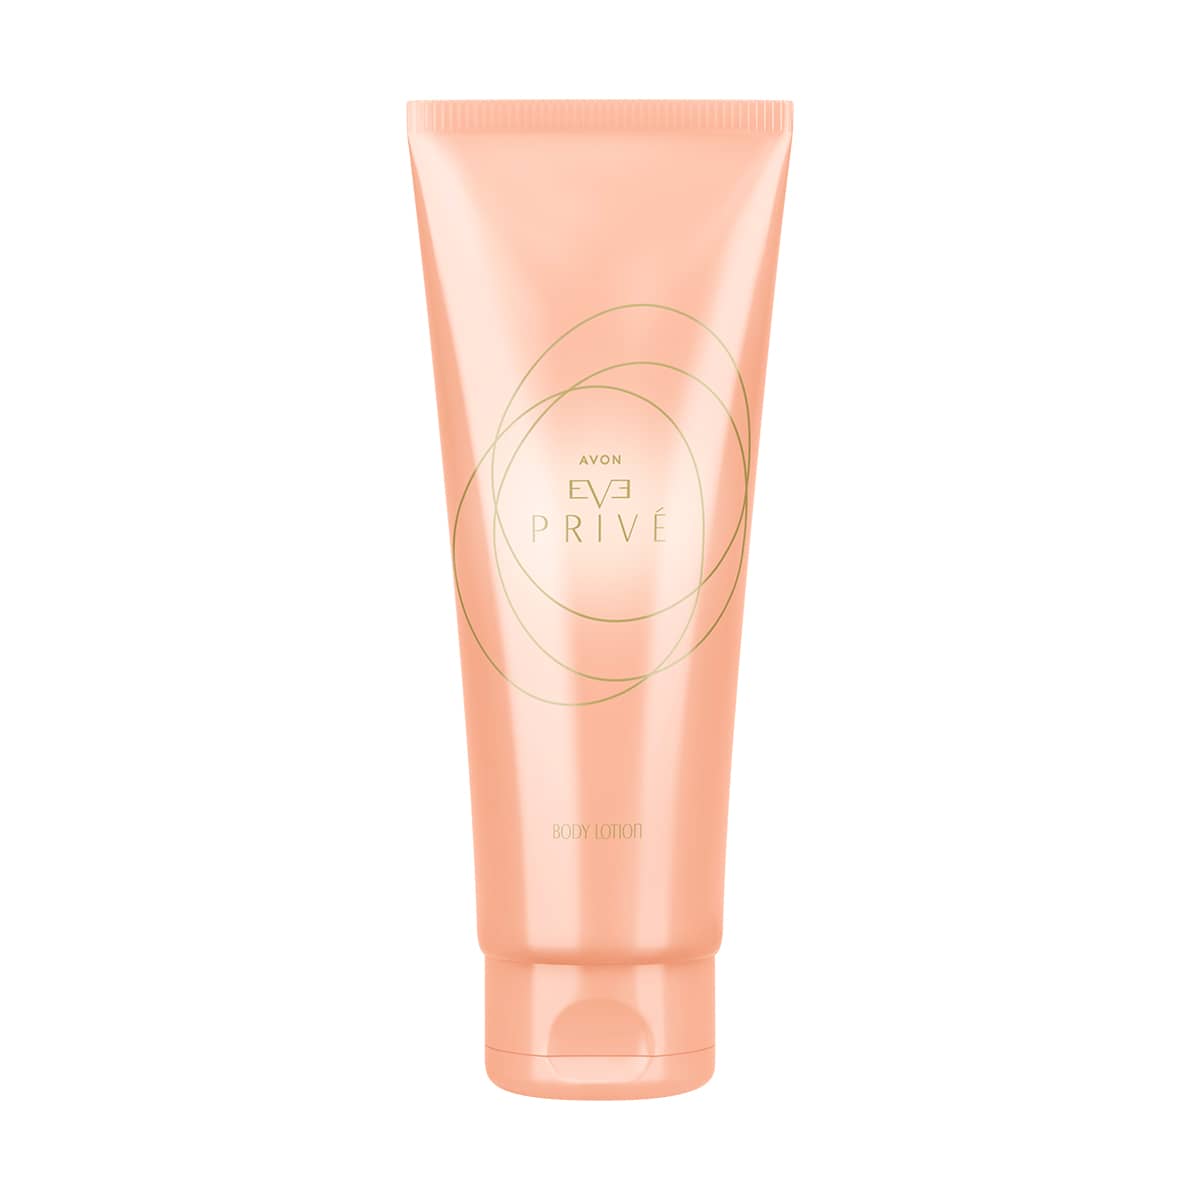 Eve Prive Body Lotion 125ml